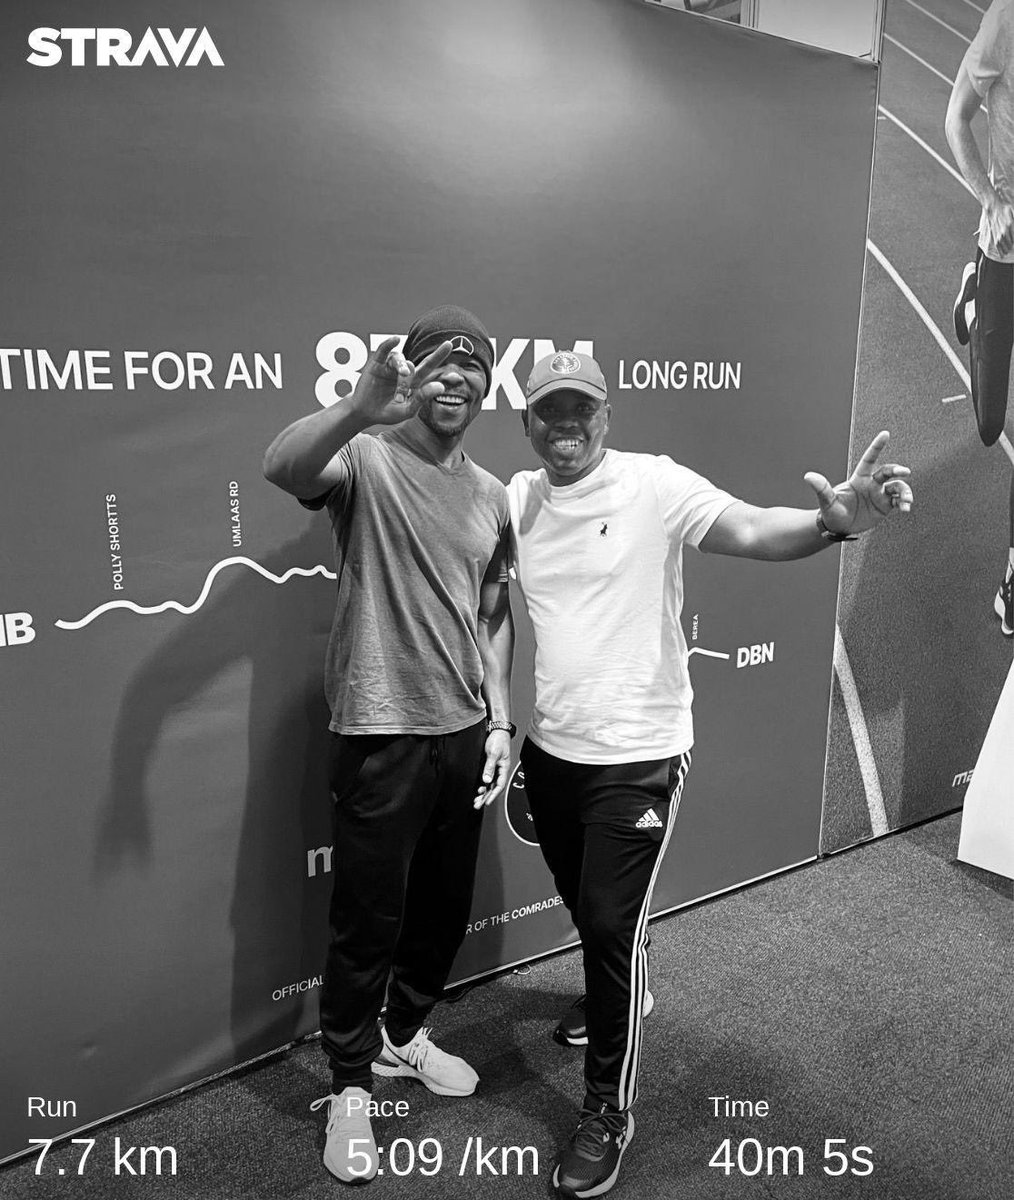 In the process of running long distances, you learn a lot about what drives you.
But most importantly, you learn to look inwards for motivation…..not outwards. …Thurday Run 🏃🏿‍♂️🏃🏾‍♂️🏃🏿‍♂️#4theloveofrunning #StillWeRise☺✊!! 
#TeamVitalityChamps 
#LiveLifeWithVitality #IPaintedMyRun